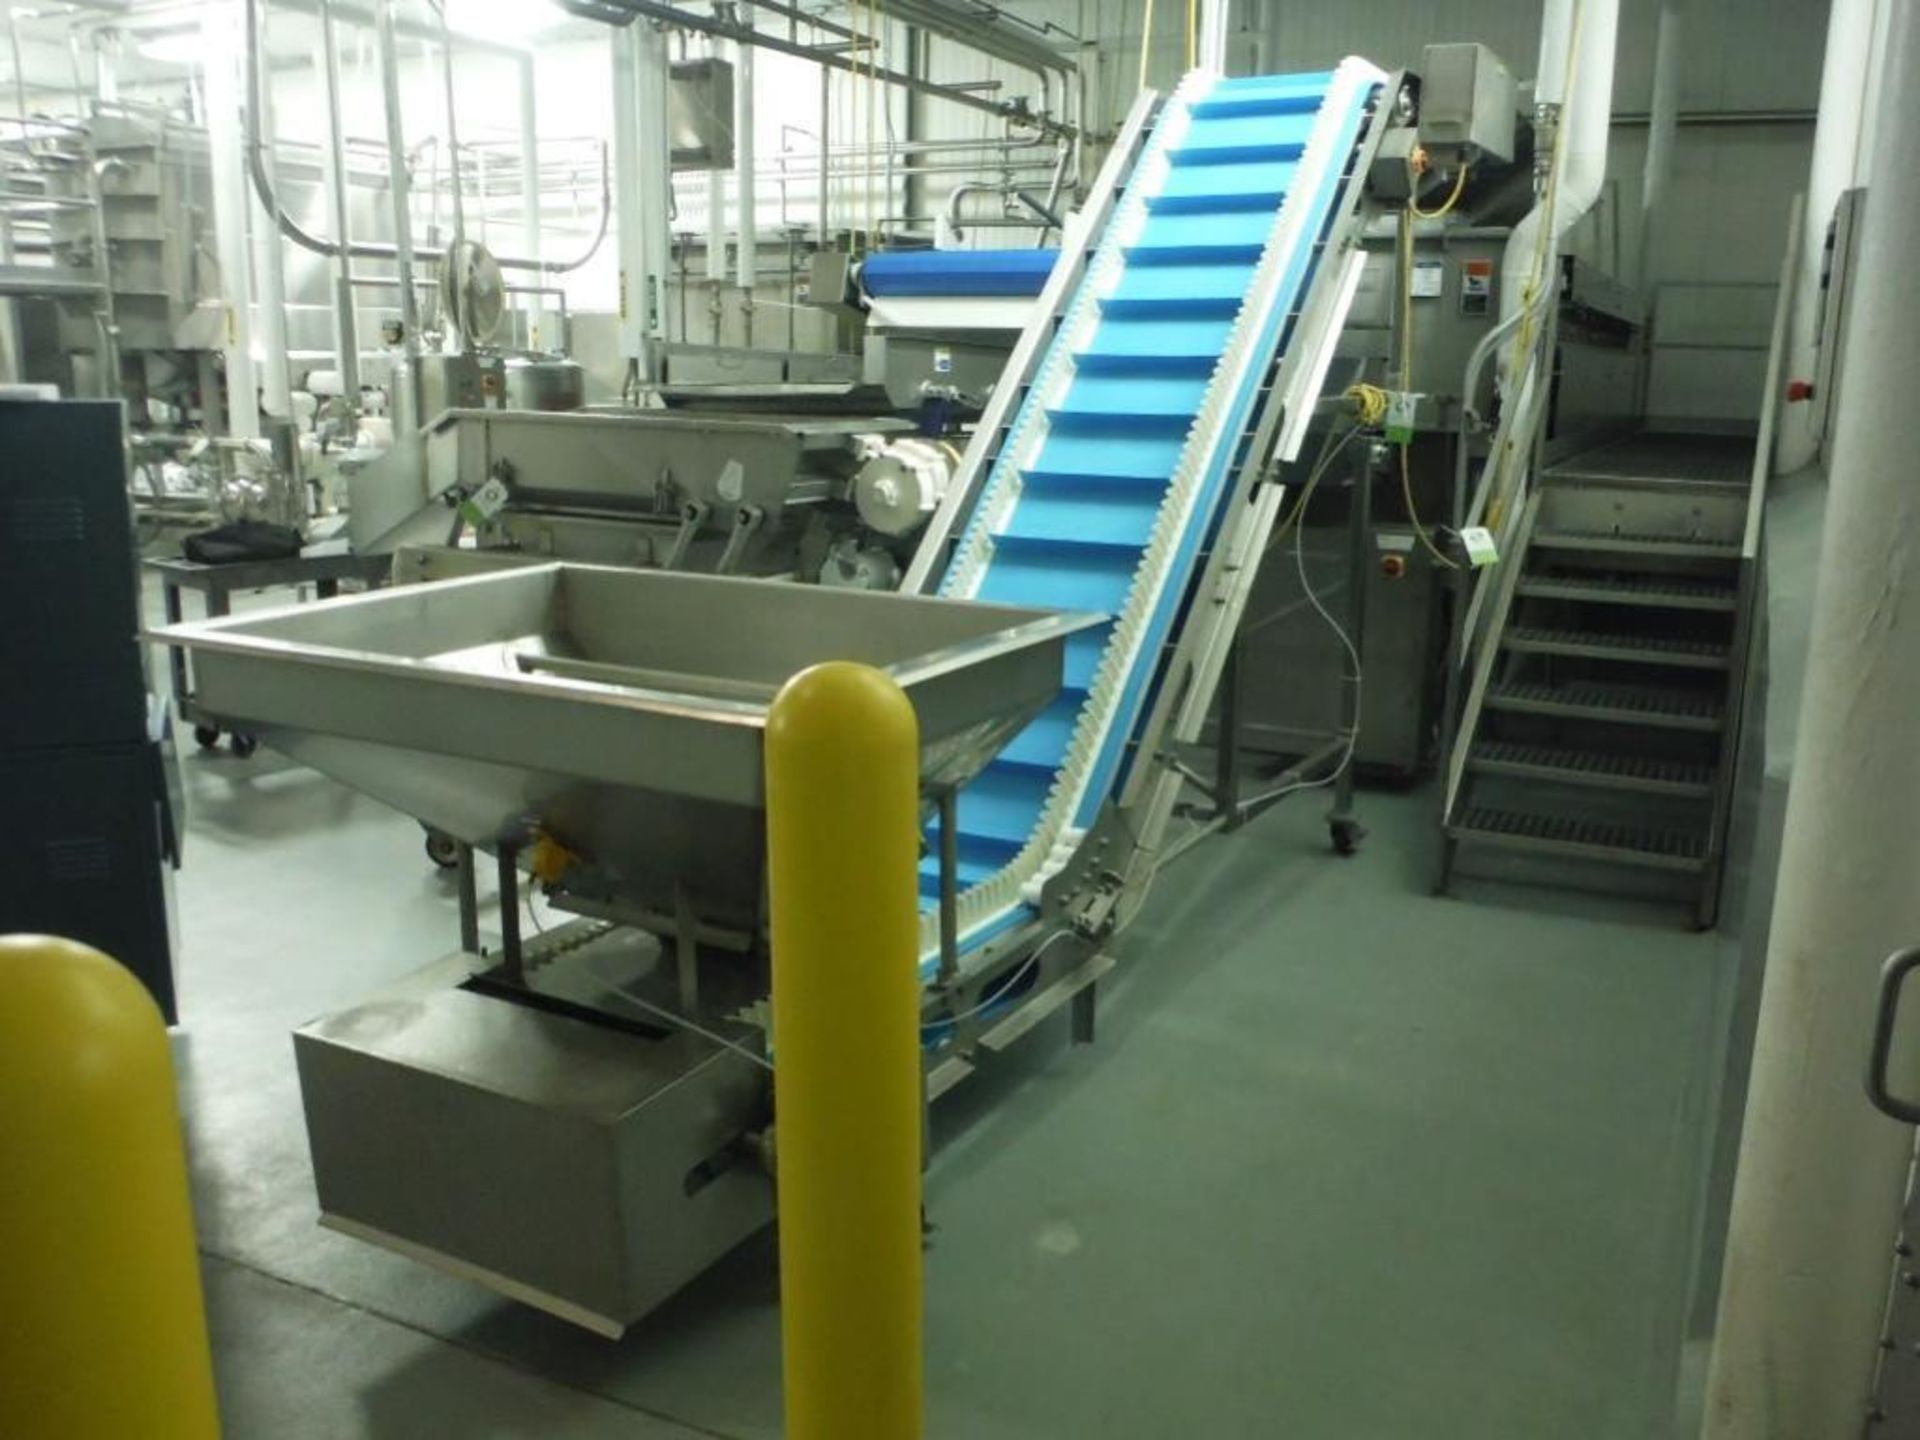 Commercial incline cleated belt conveyor, SN UBC0211-11560, 15 ft. long x 20 in. wide x 20 in. infee